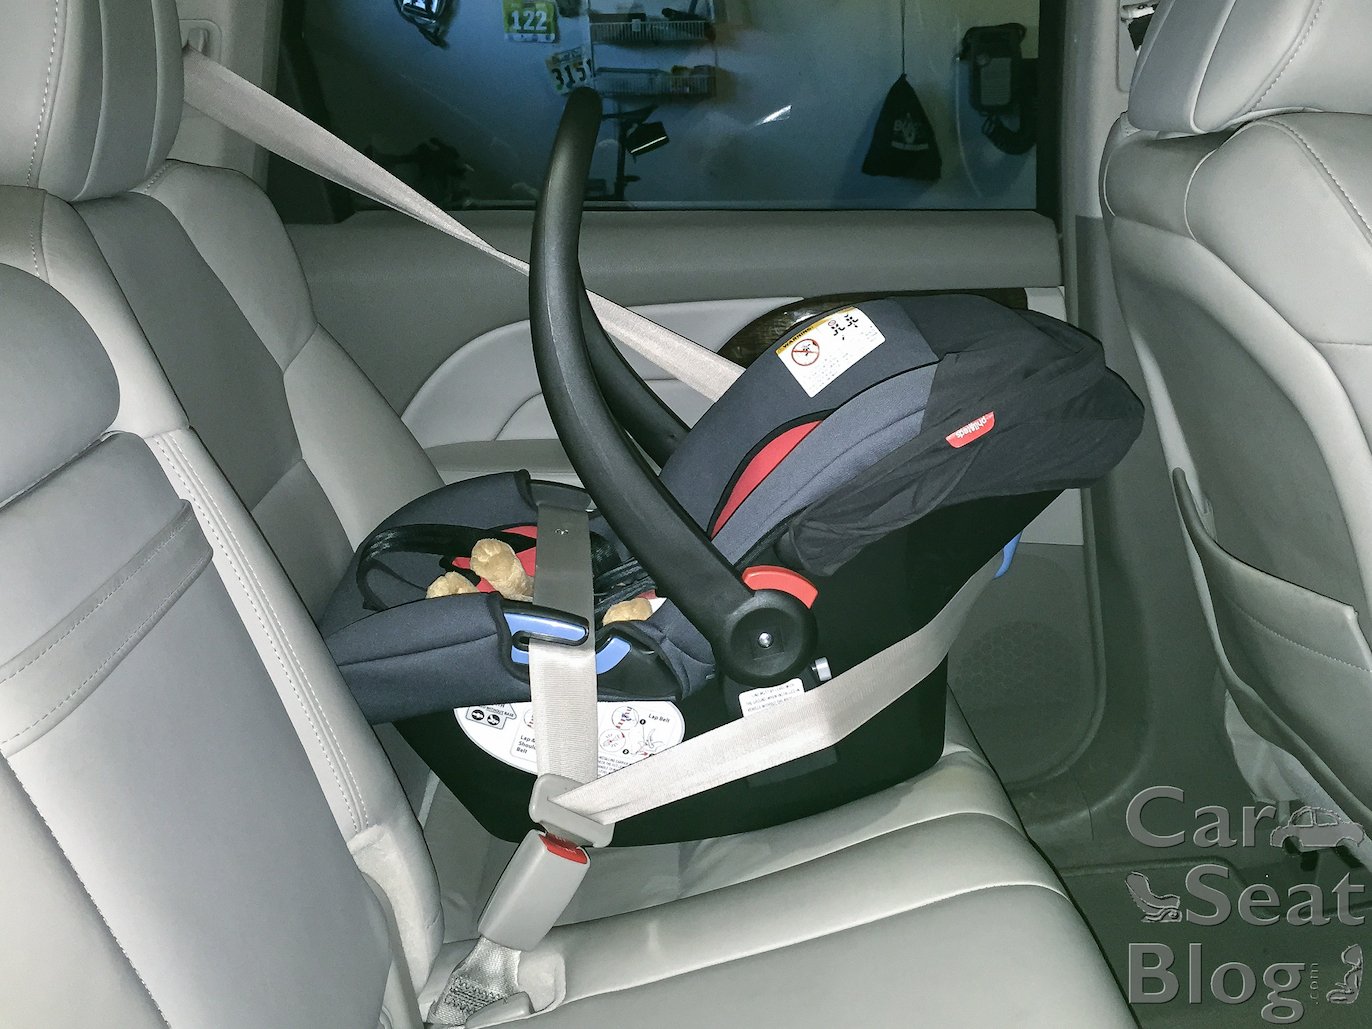 Rear Facing Cats With European, How To Install Rear Facing Baby Car Seat With Seatbelt